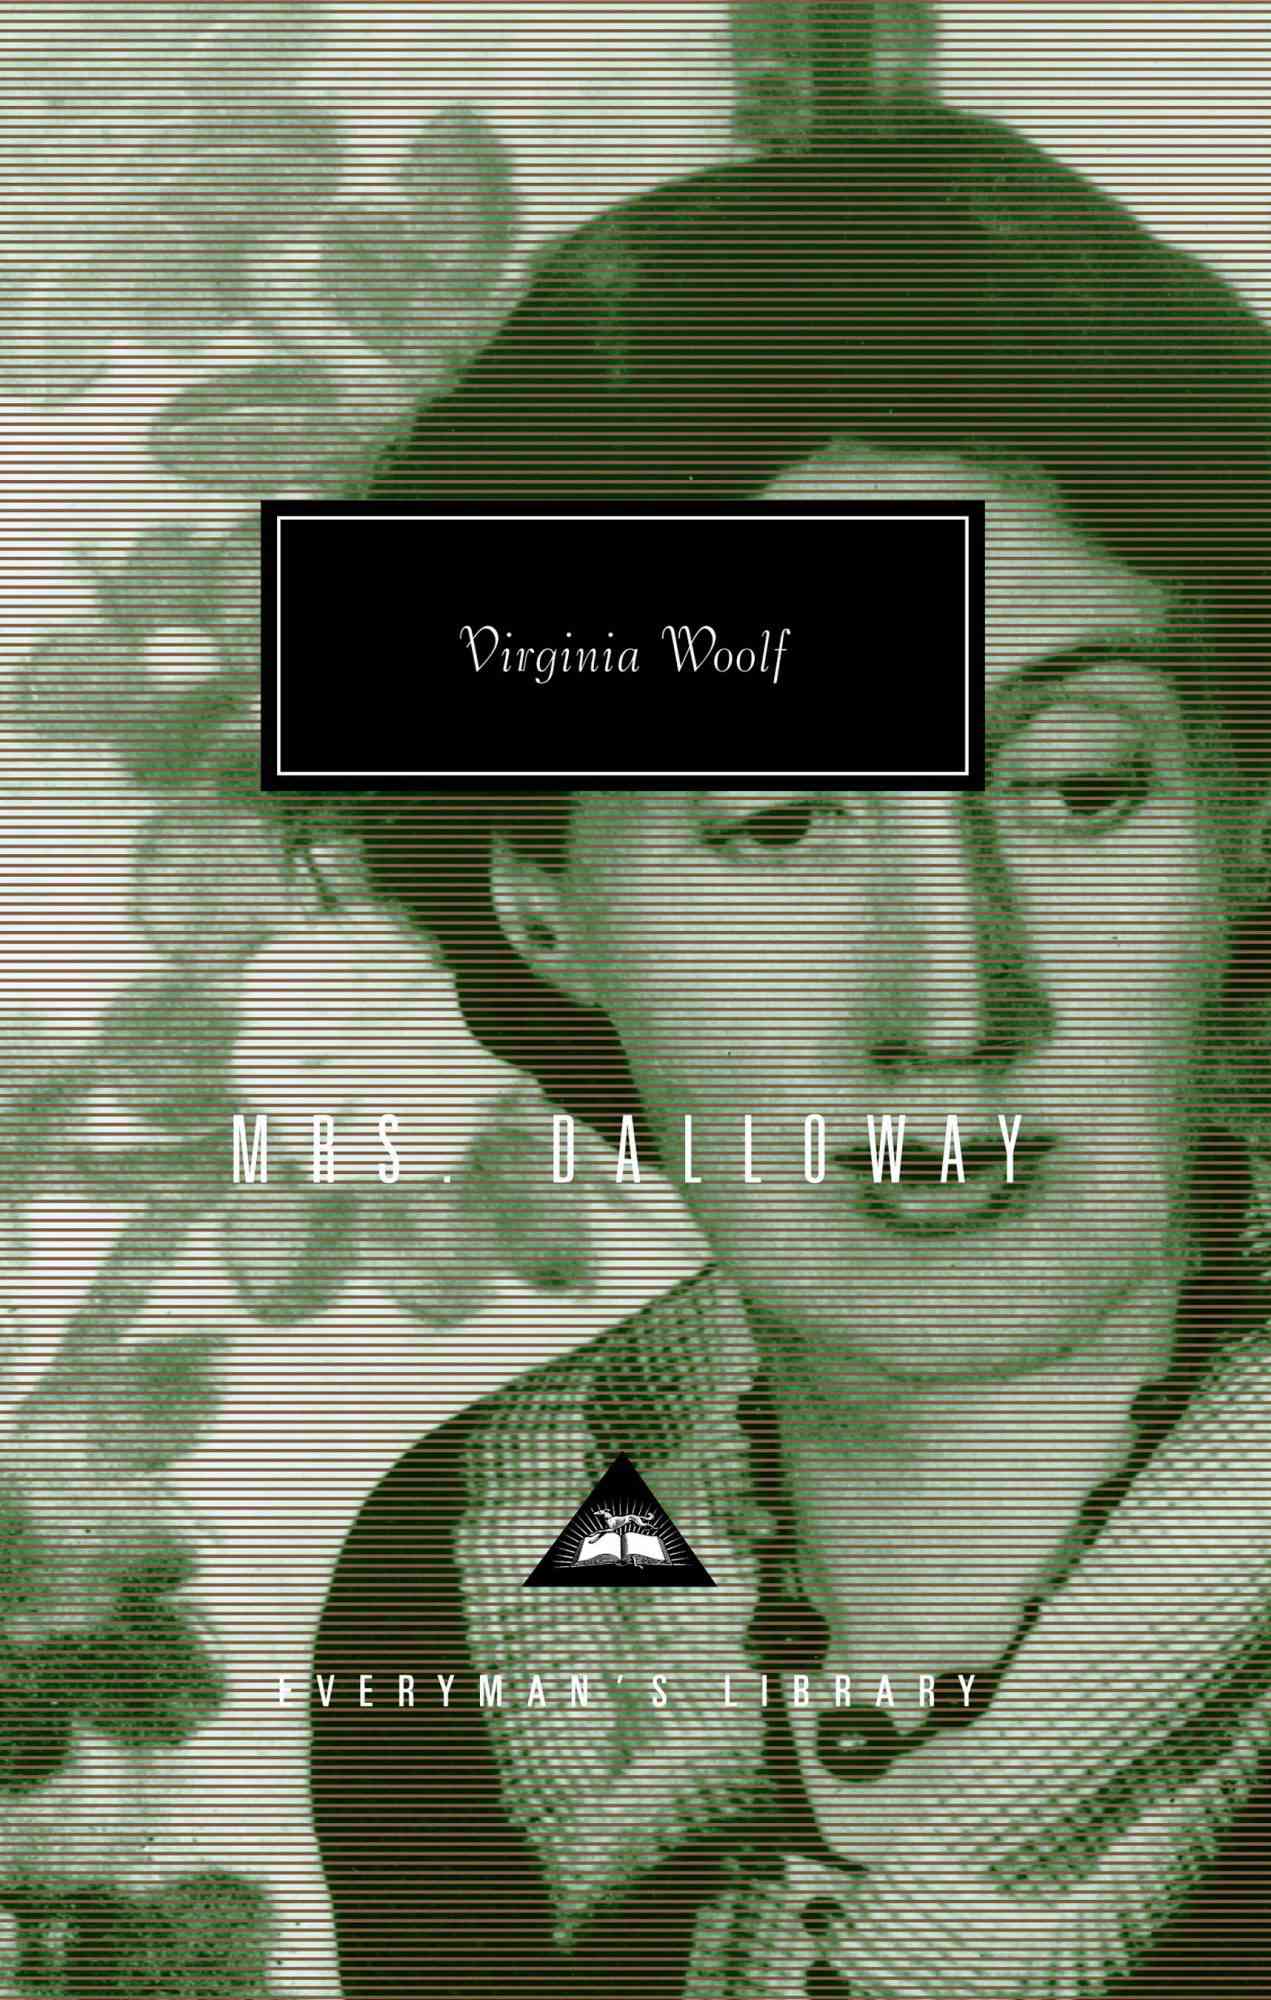 Clarissa&rsquo;s party in Mrs. Dalloway&nbsp;(Virginia Woolf)